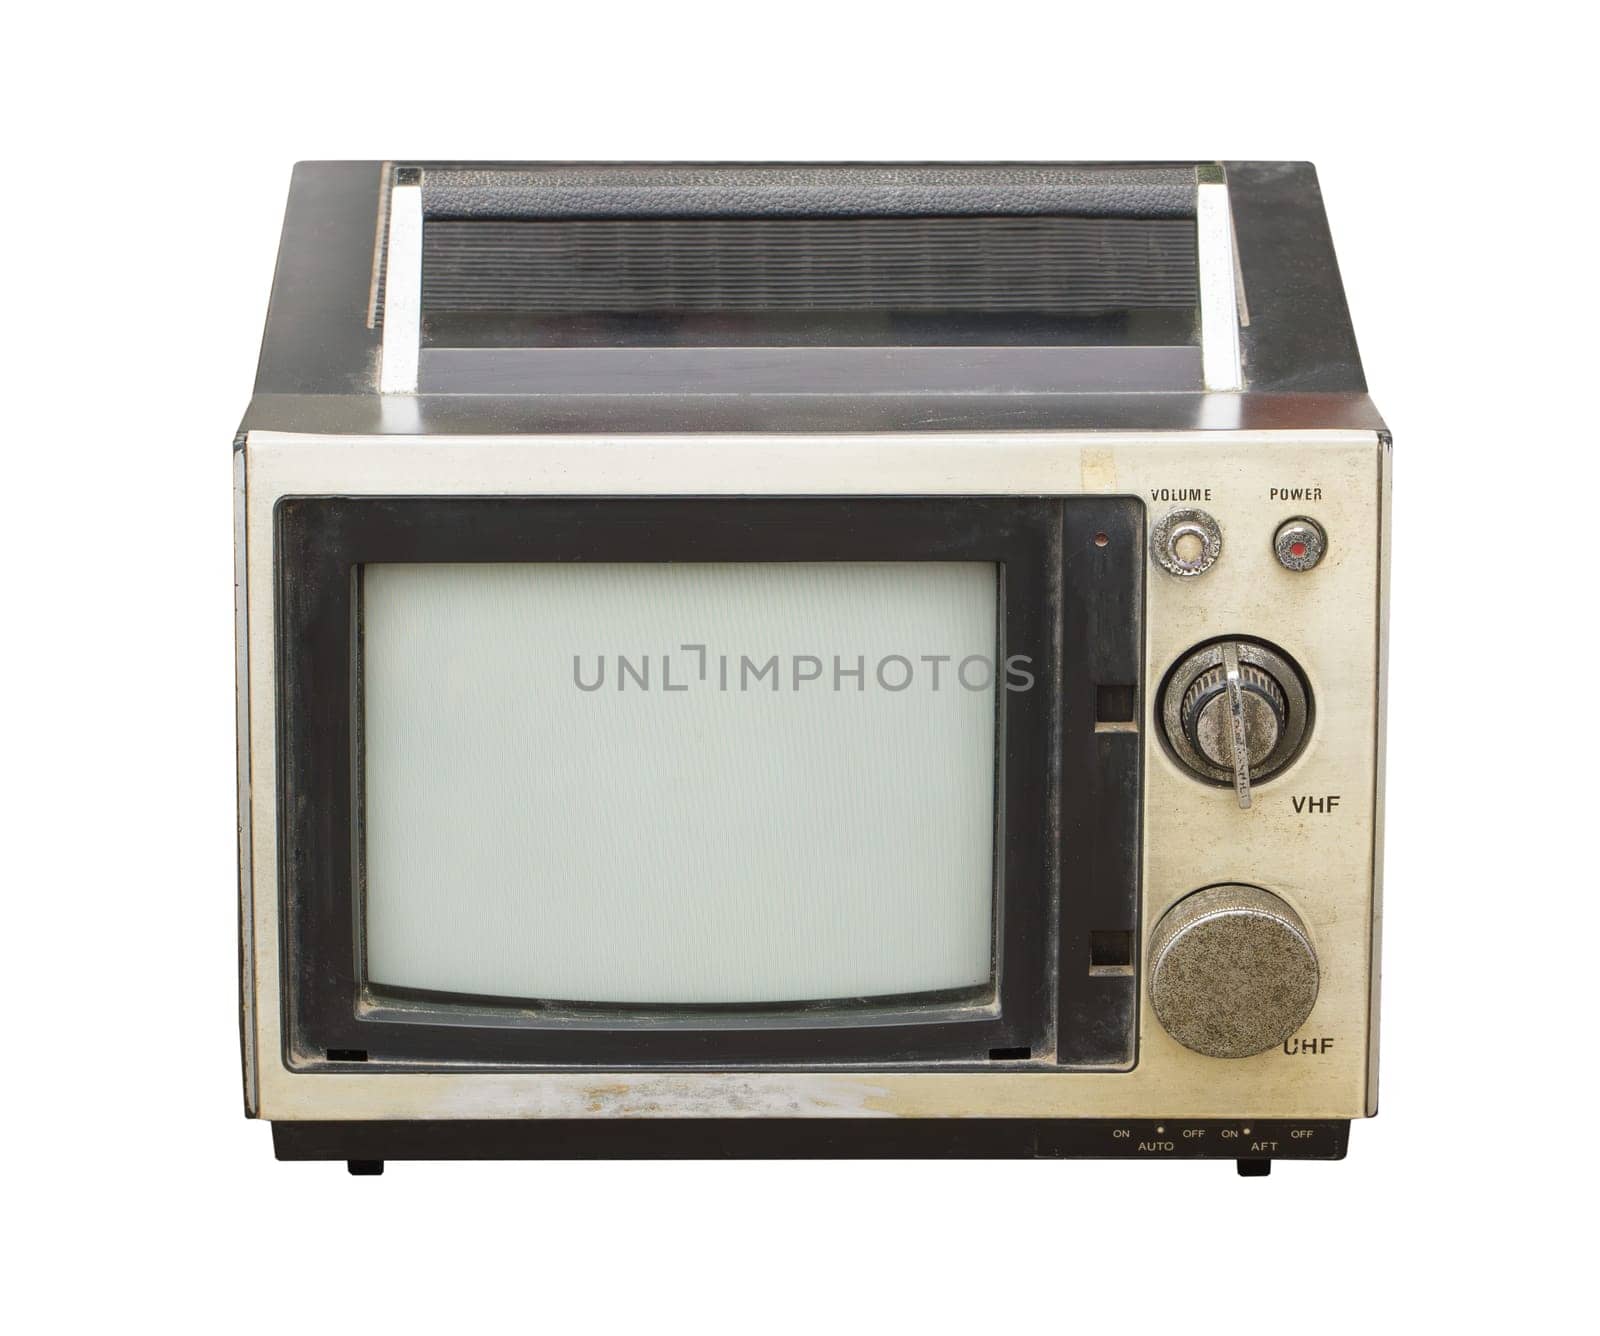 Vintage television isolated on white by stoonn